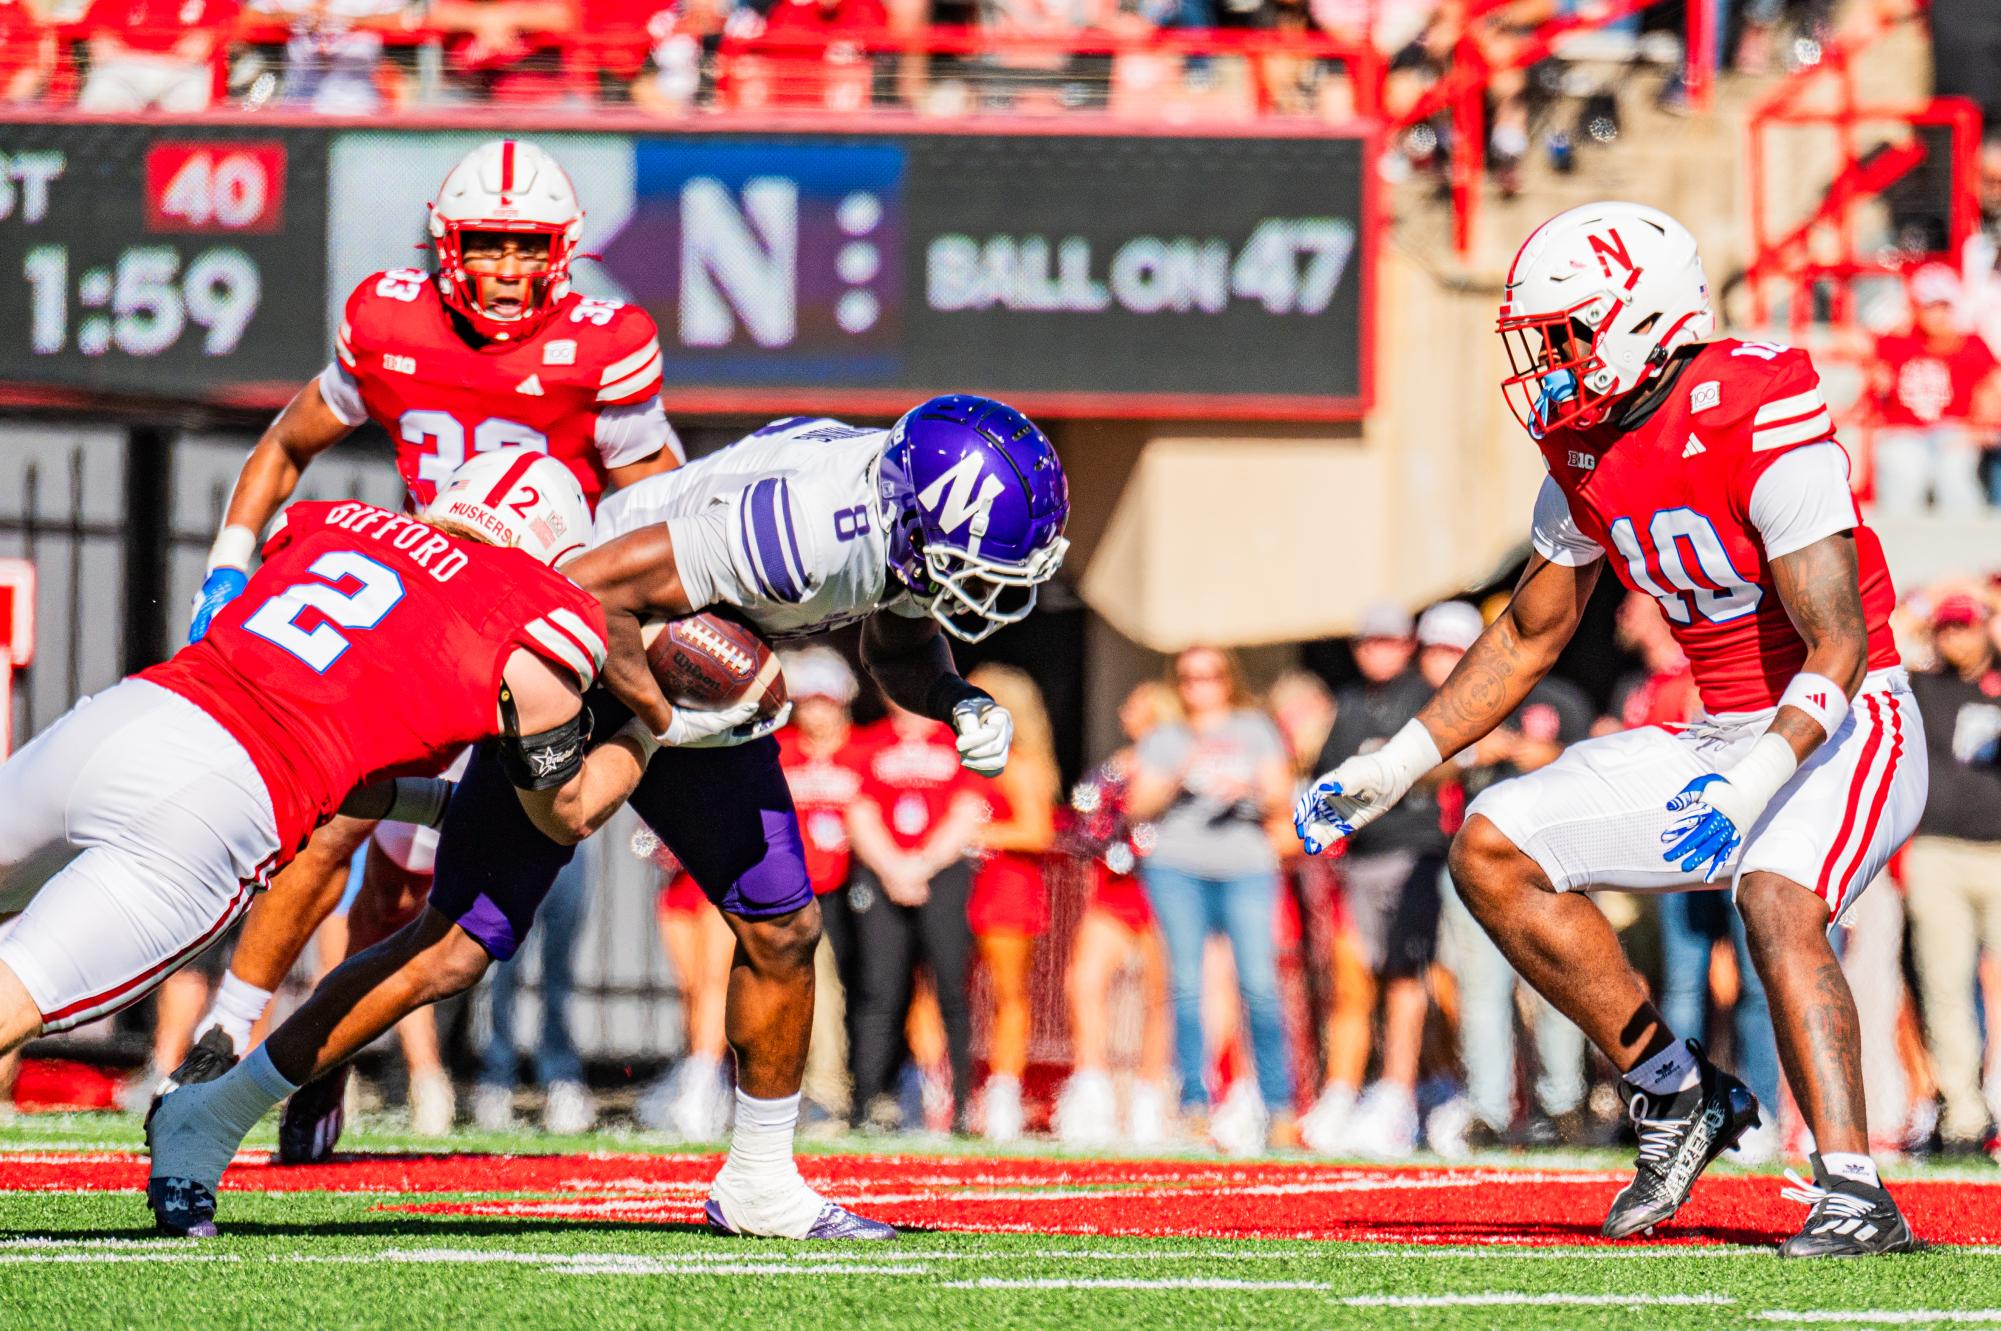 Captured: Wildcats repeat flickering performance in away matchup against the Cornhuskers